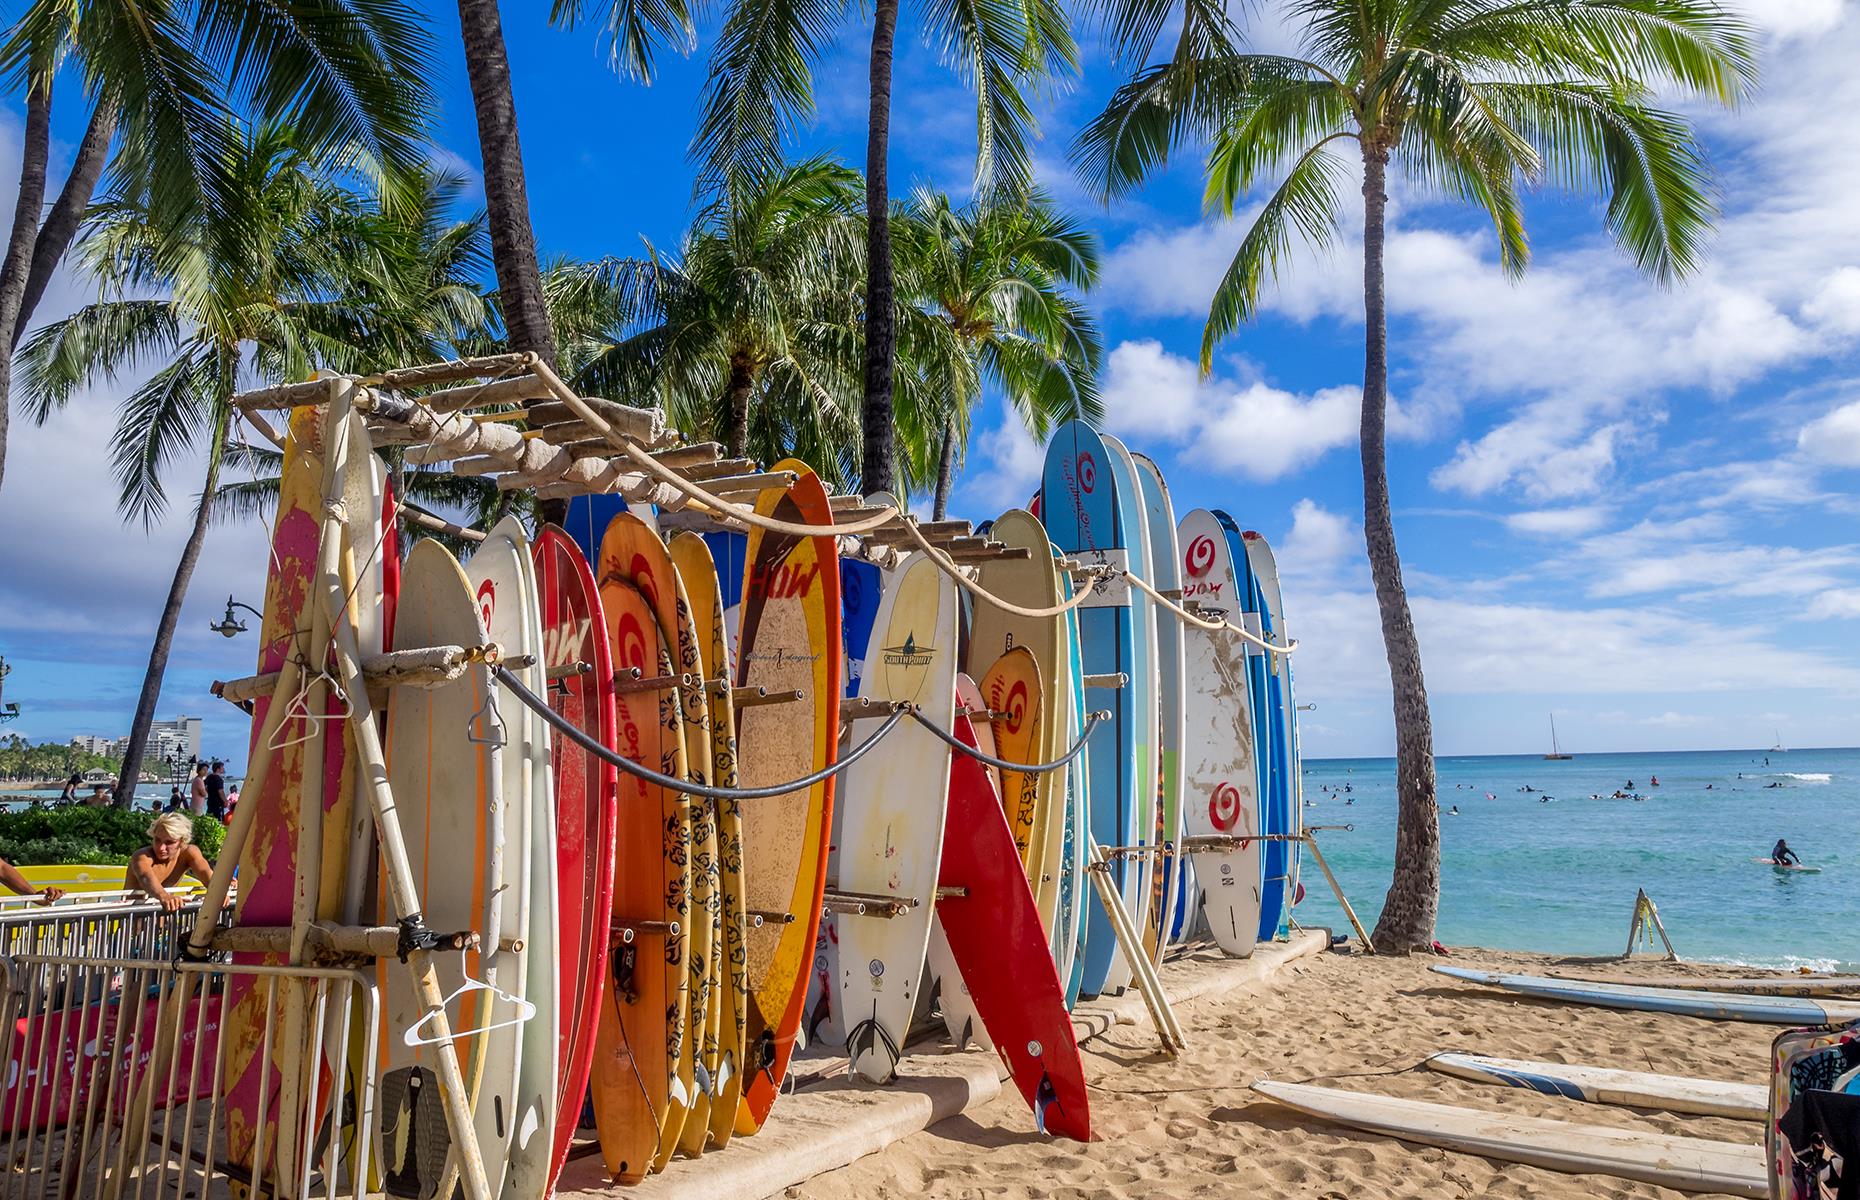 If you love catching waves – or want to learn how – you can't do better than Hawaii. Waikiki, on Oahu, is a place of pilgrimage for surfers from all over the world and there are plenty of surf schools on the beach waiting to show novices the ropes.